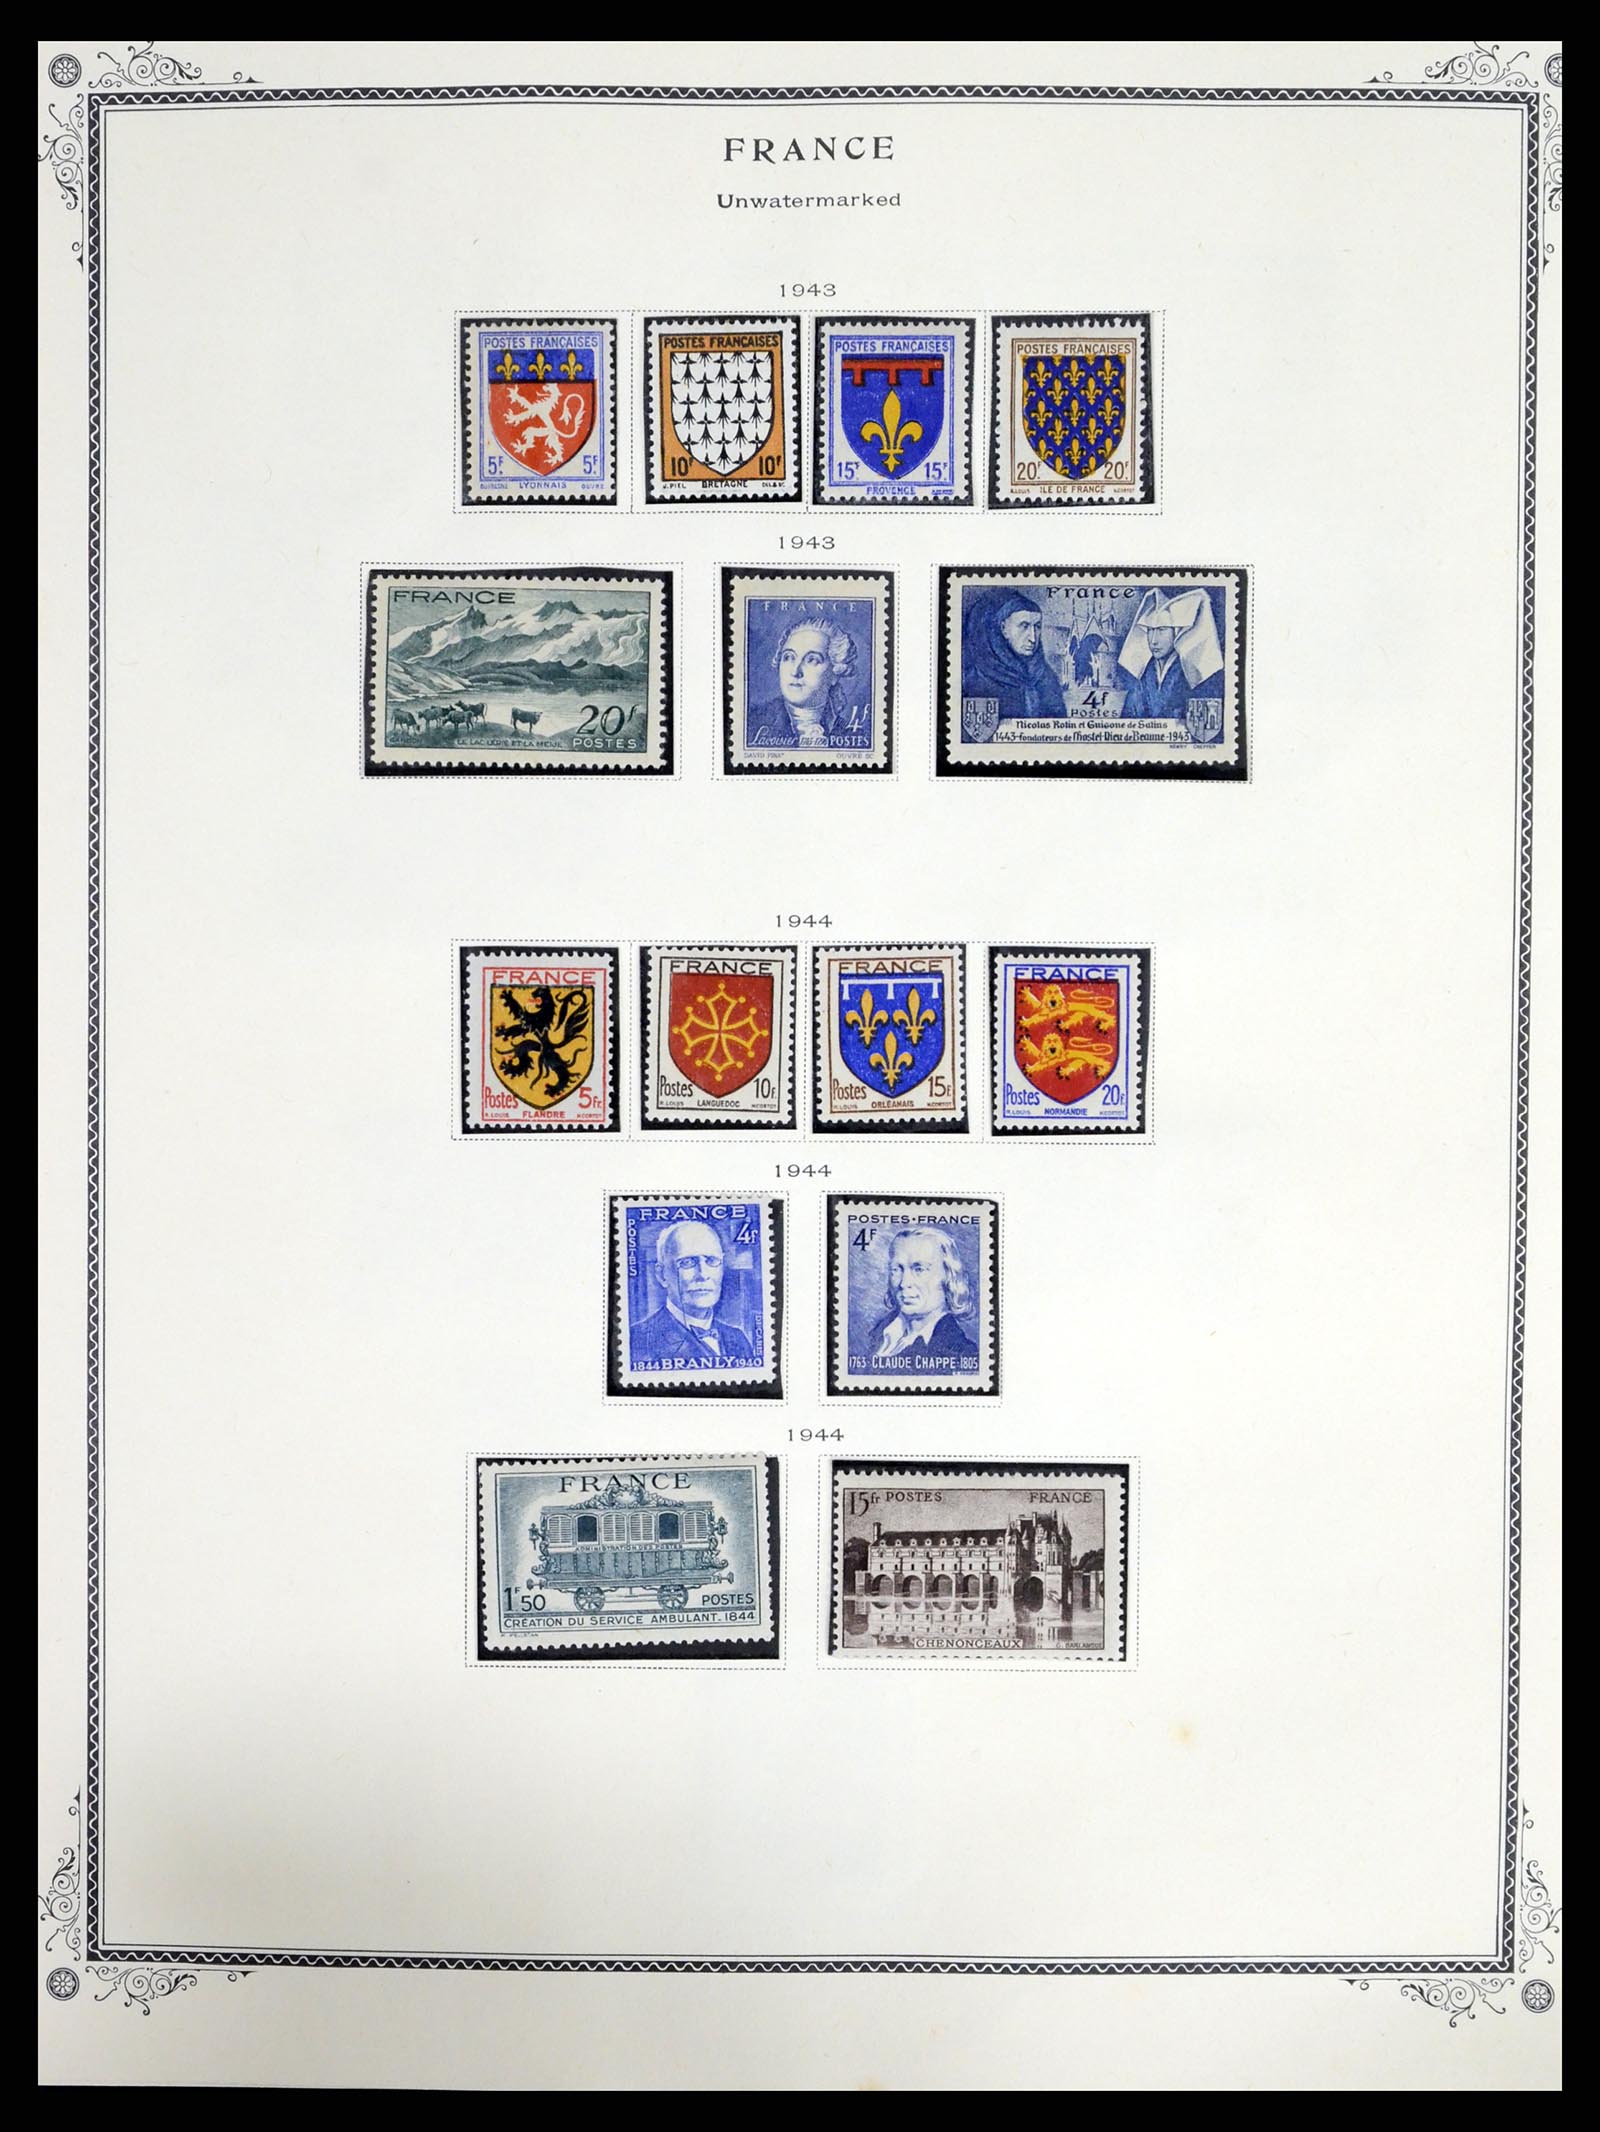 37639 017 - Stamp collection 37639 France 1853-1984.